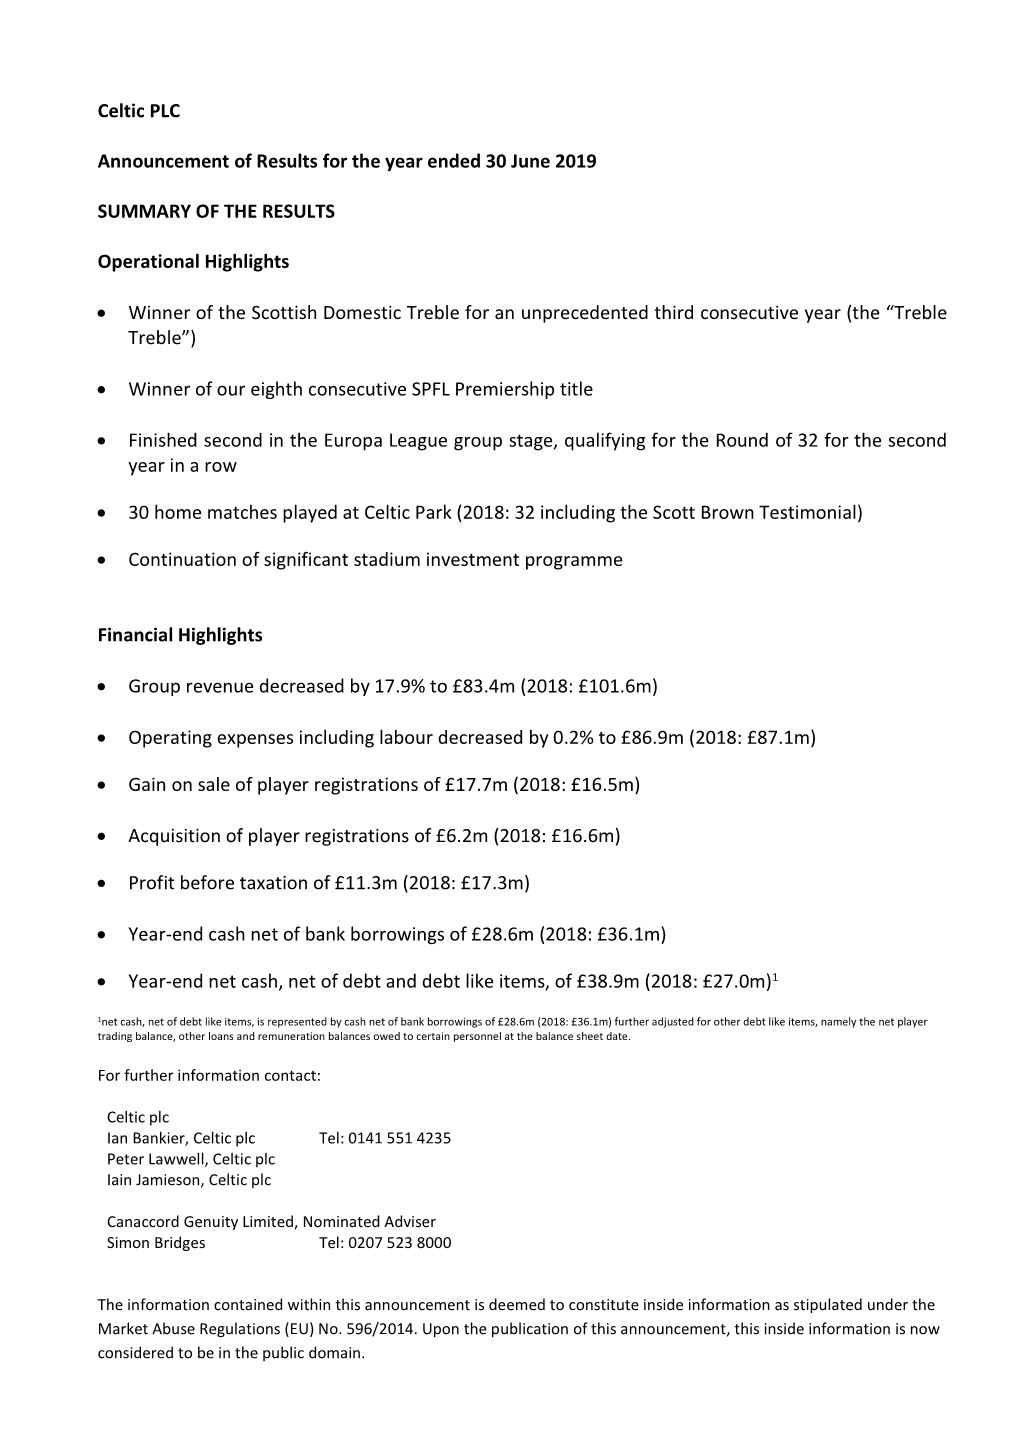 Celtic PLC Announcement of Results for the Year Ended 30 June 2019 SUMMARY of the RESULTS Operational Highlights • Winner of T